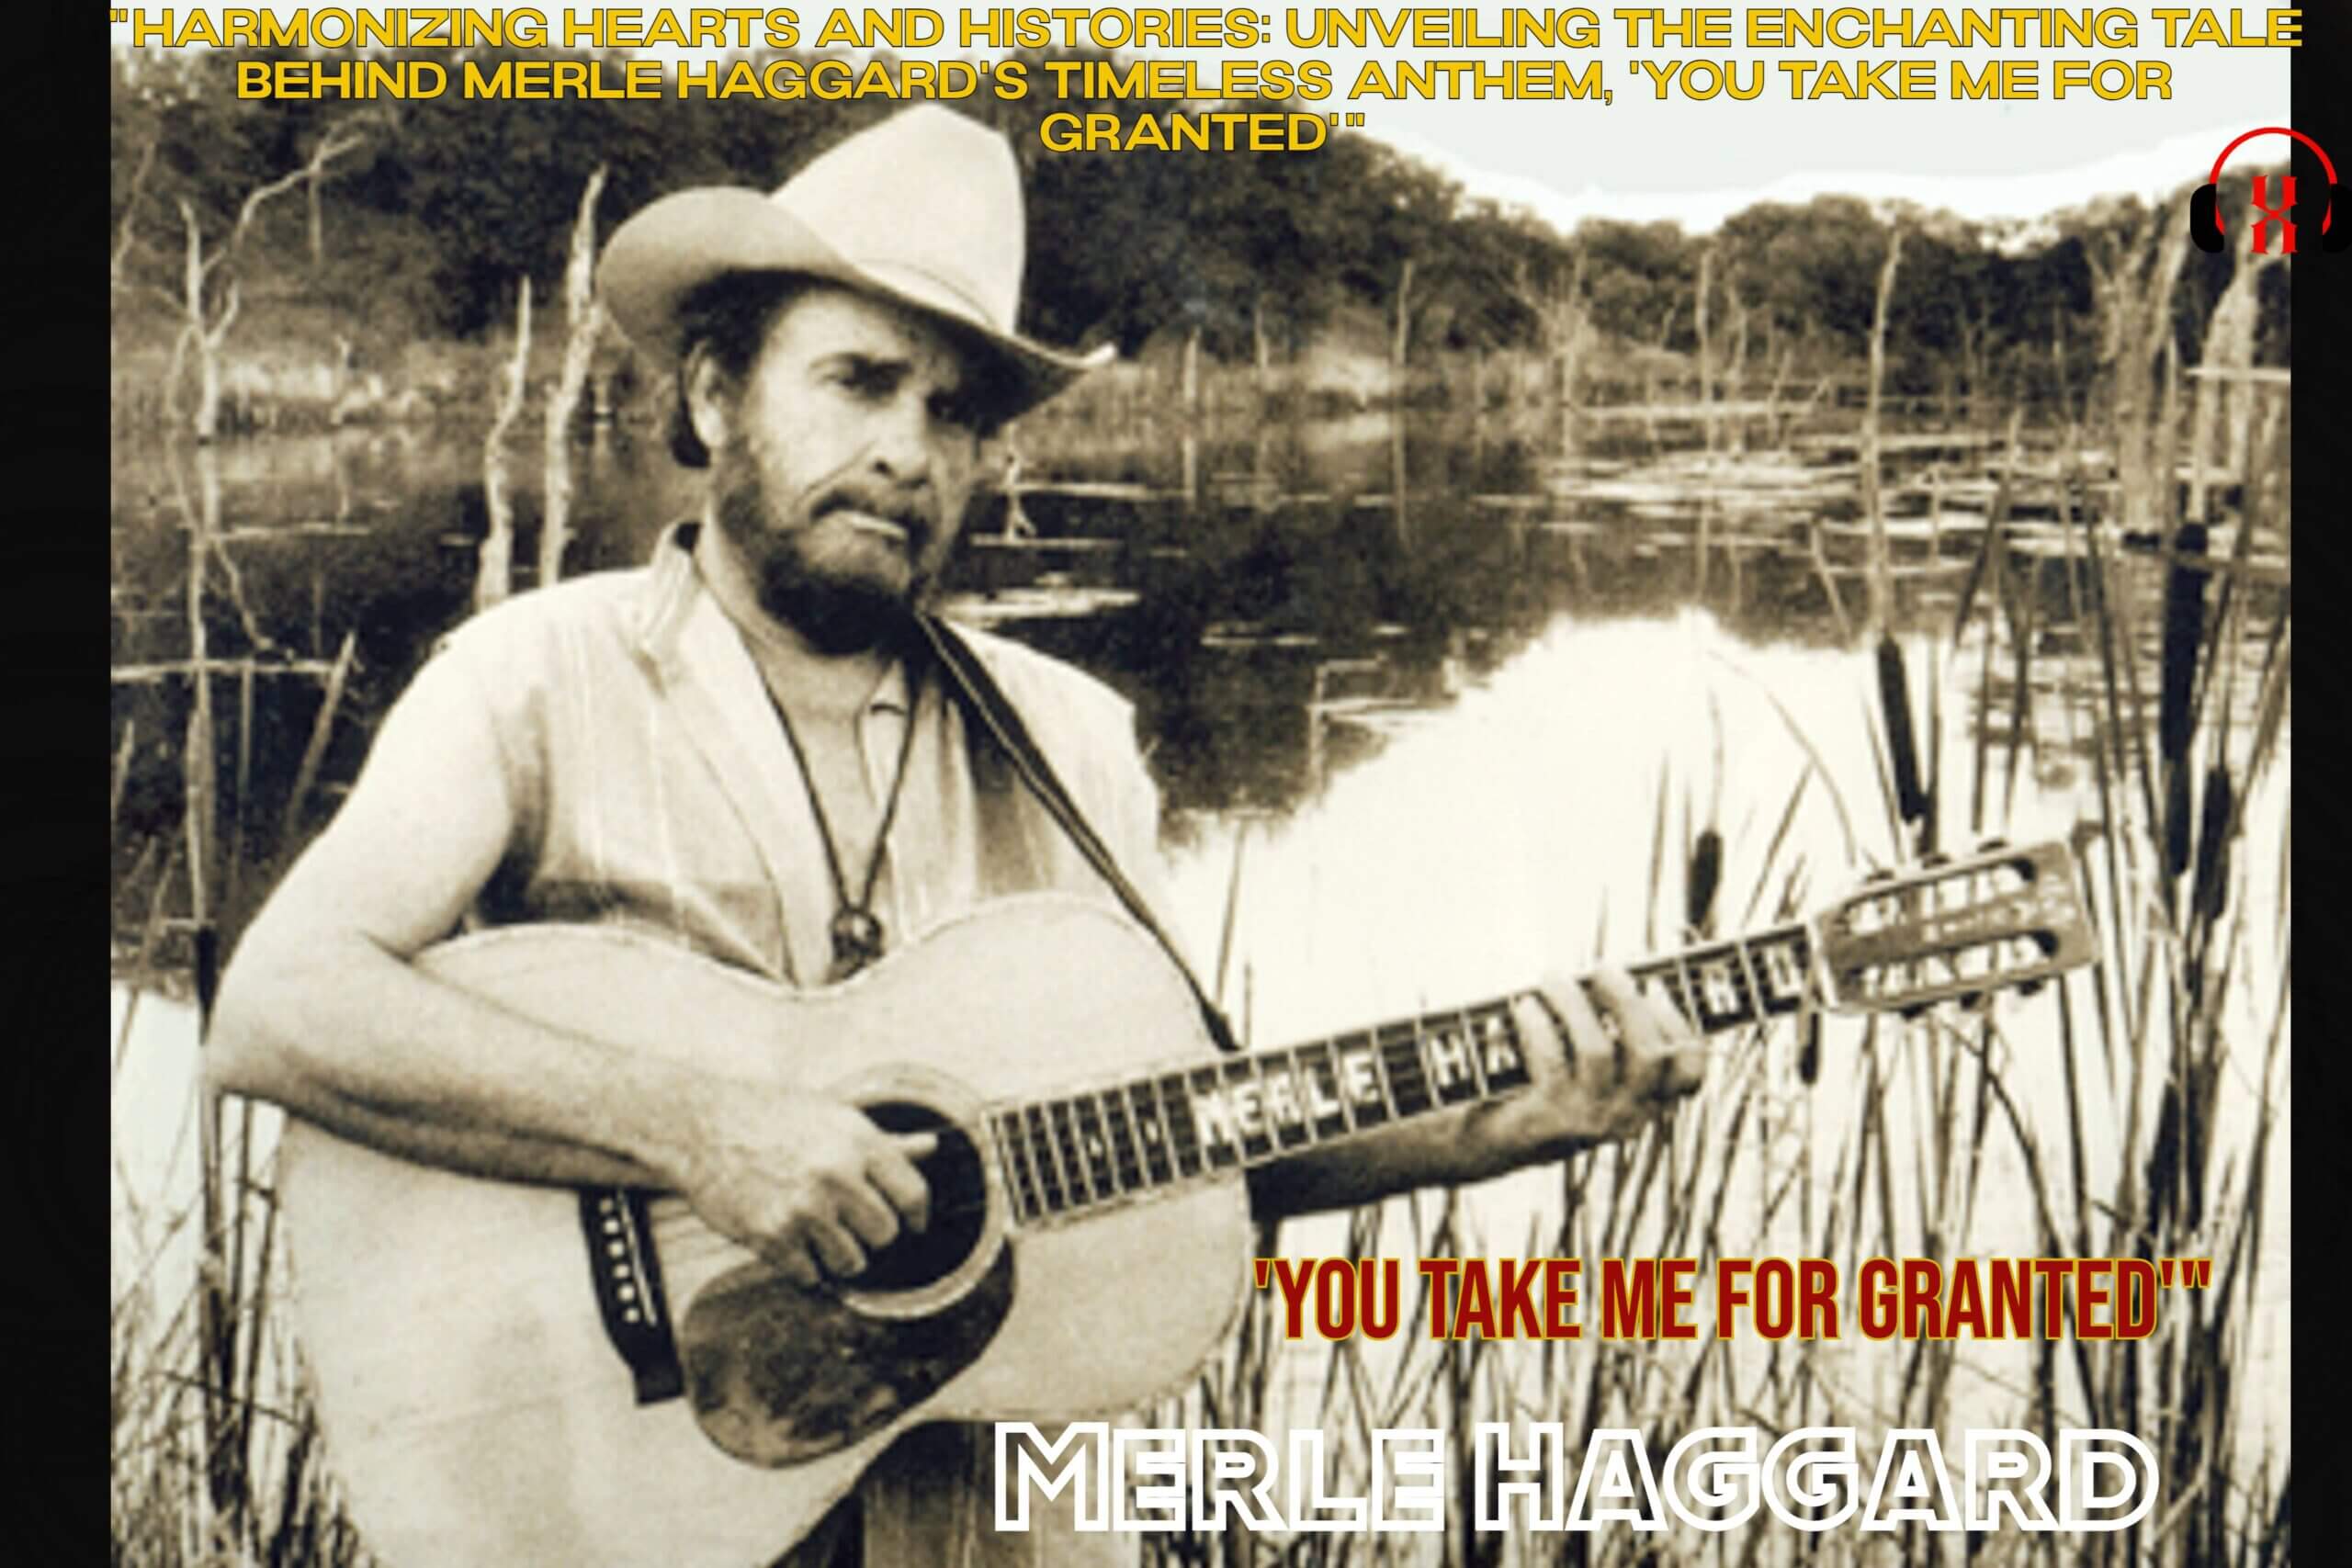 “Harmonizing Hearts and Histories: Unveiling the Enchanting Tale Behind Merle Haggard’s Timeless Anthem, ‘You Take Me for Granted'”